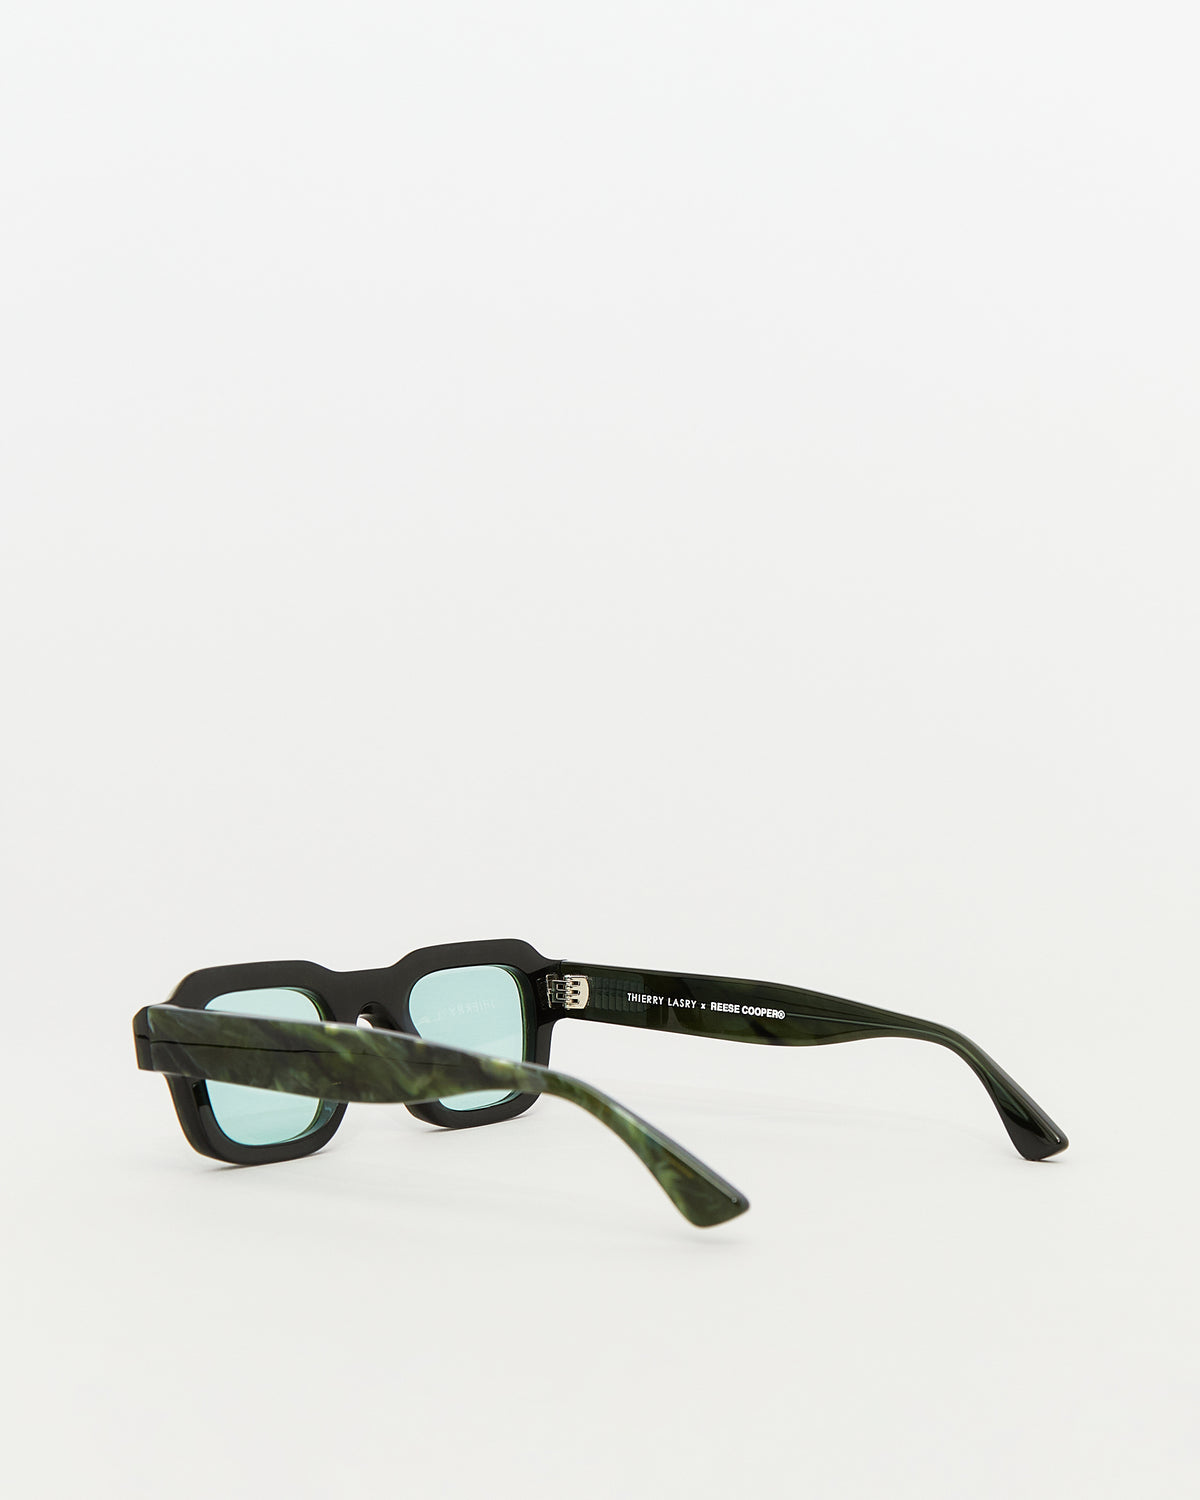 RC x Thierry Lasry Sunglasses in Green with Green Lens